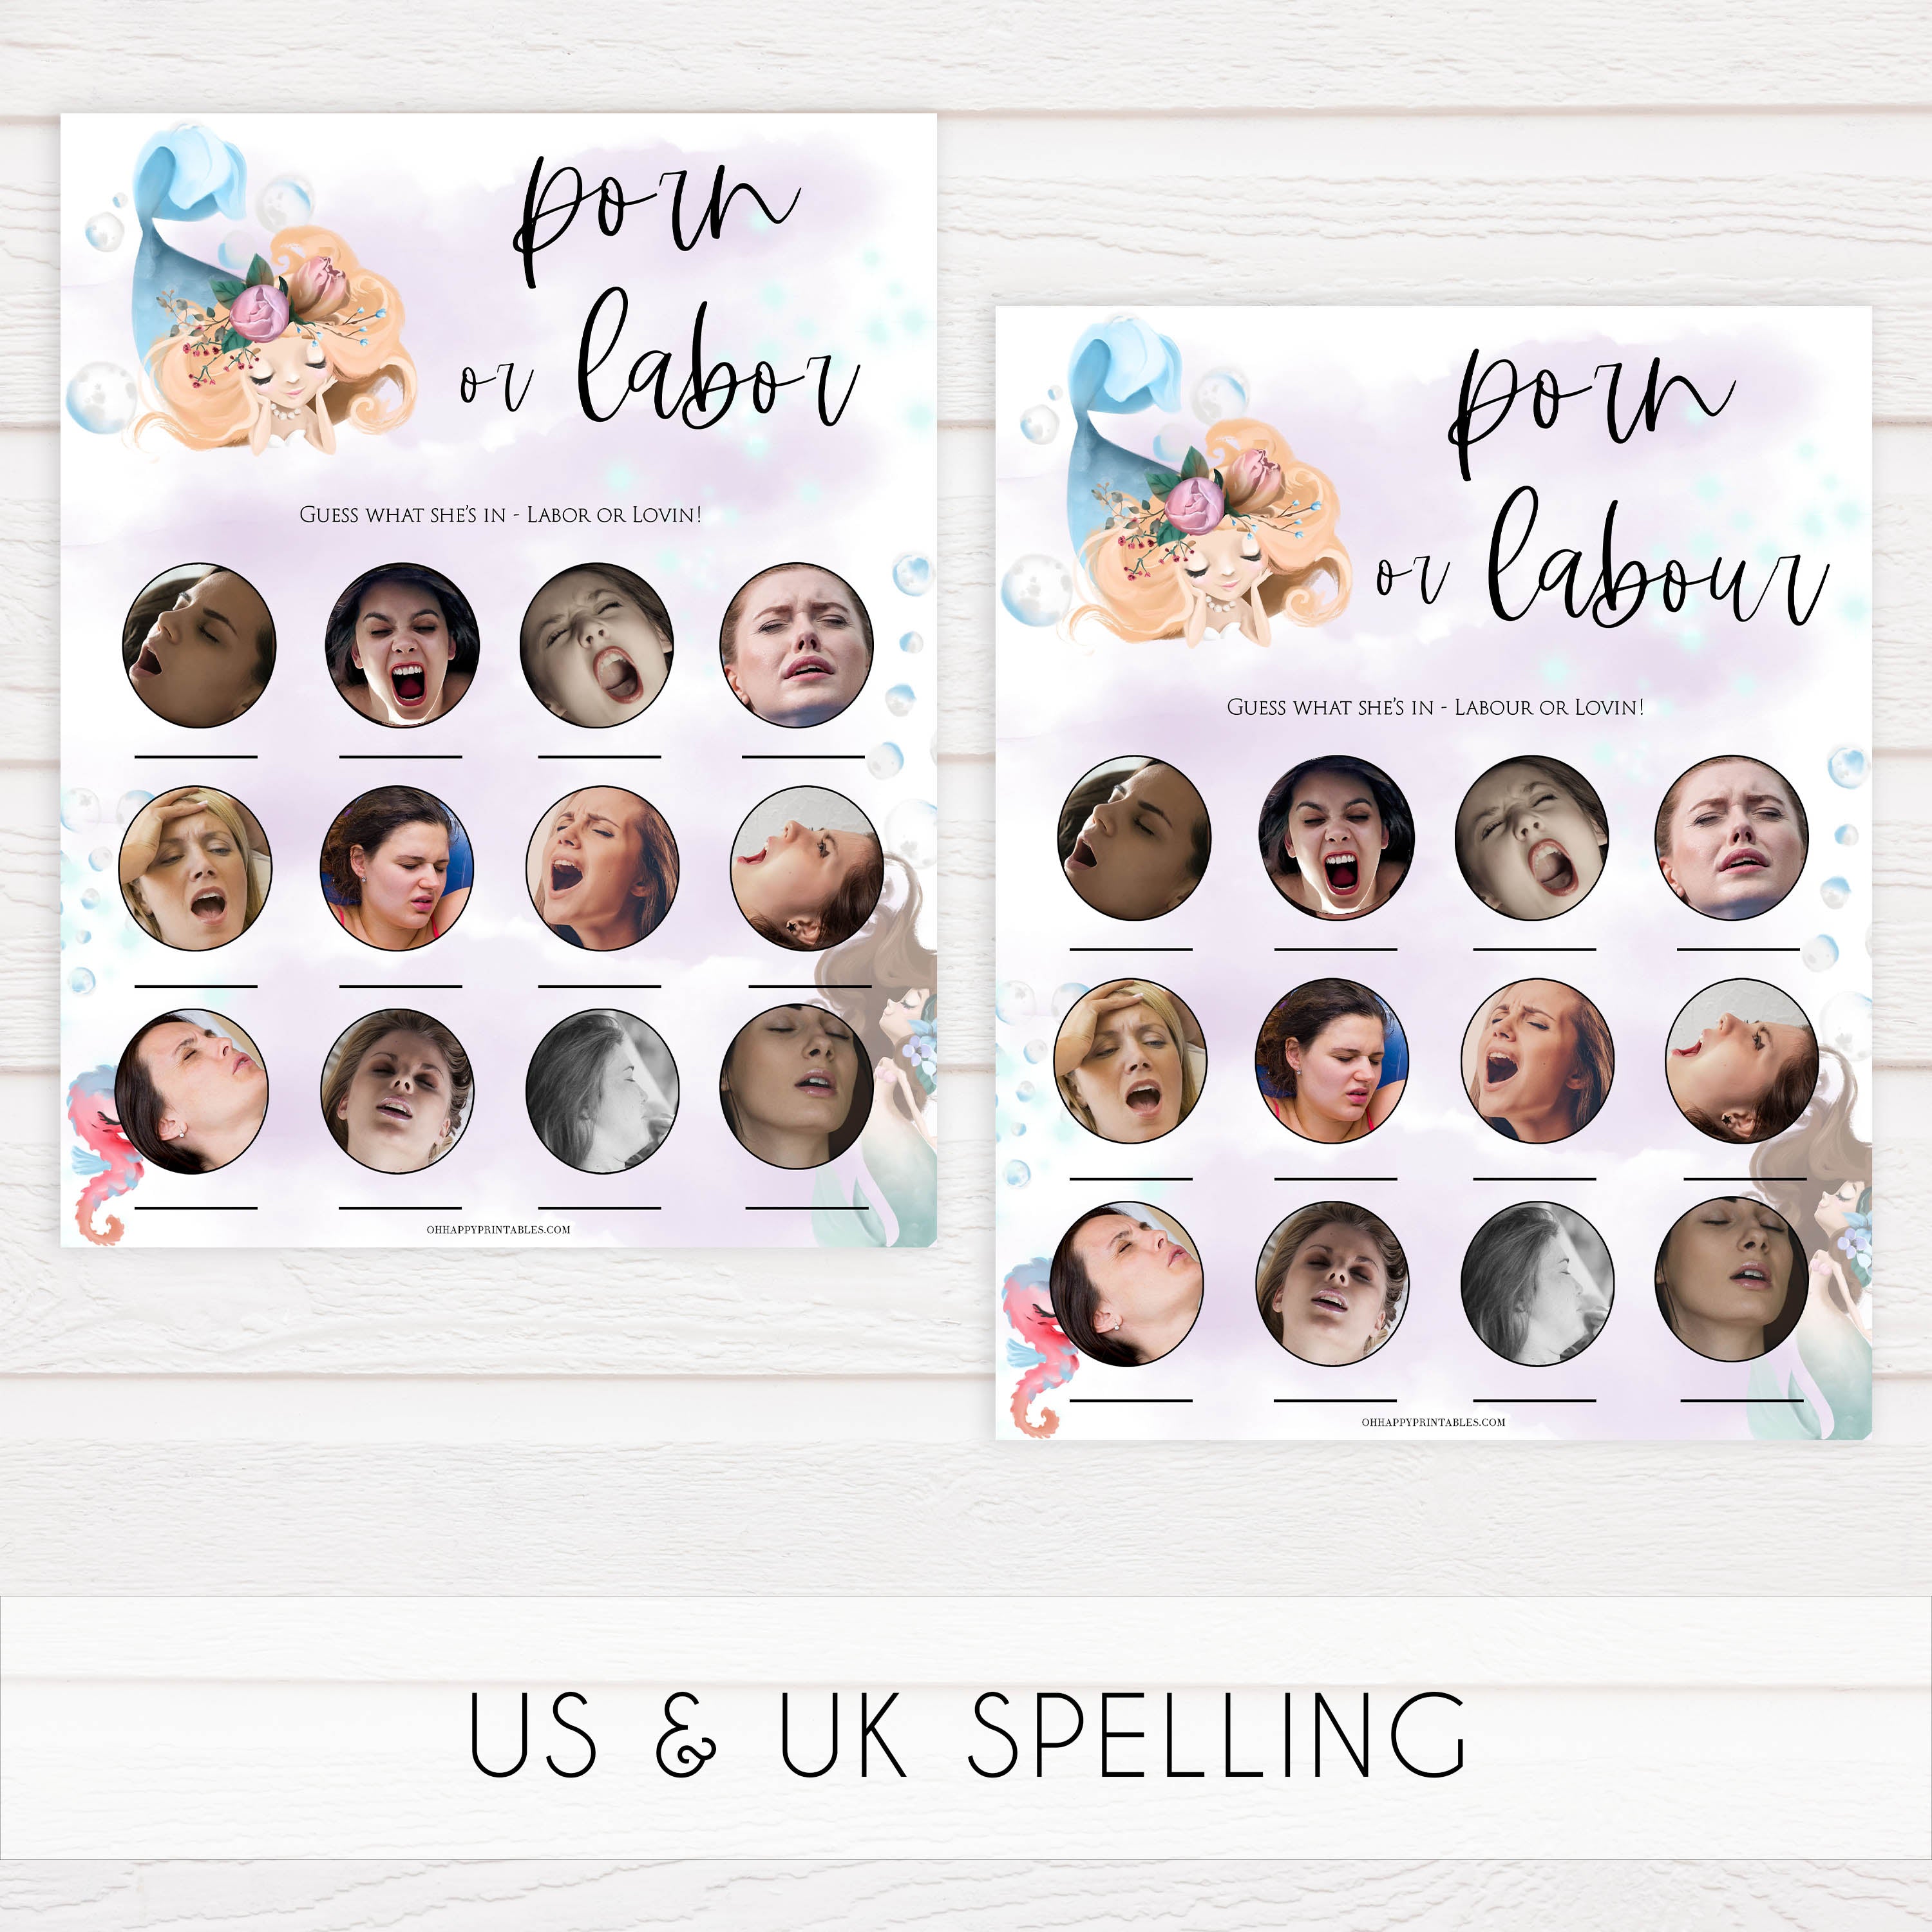 porn or labor, labor or porn game, Printable baby shower games, little mermaid baby games, baby shower games, fun baby shower ideas, top baby shower ideas, little mermaid baby shower, baby shower games, pink hearts baby shower ideas